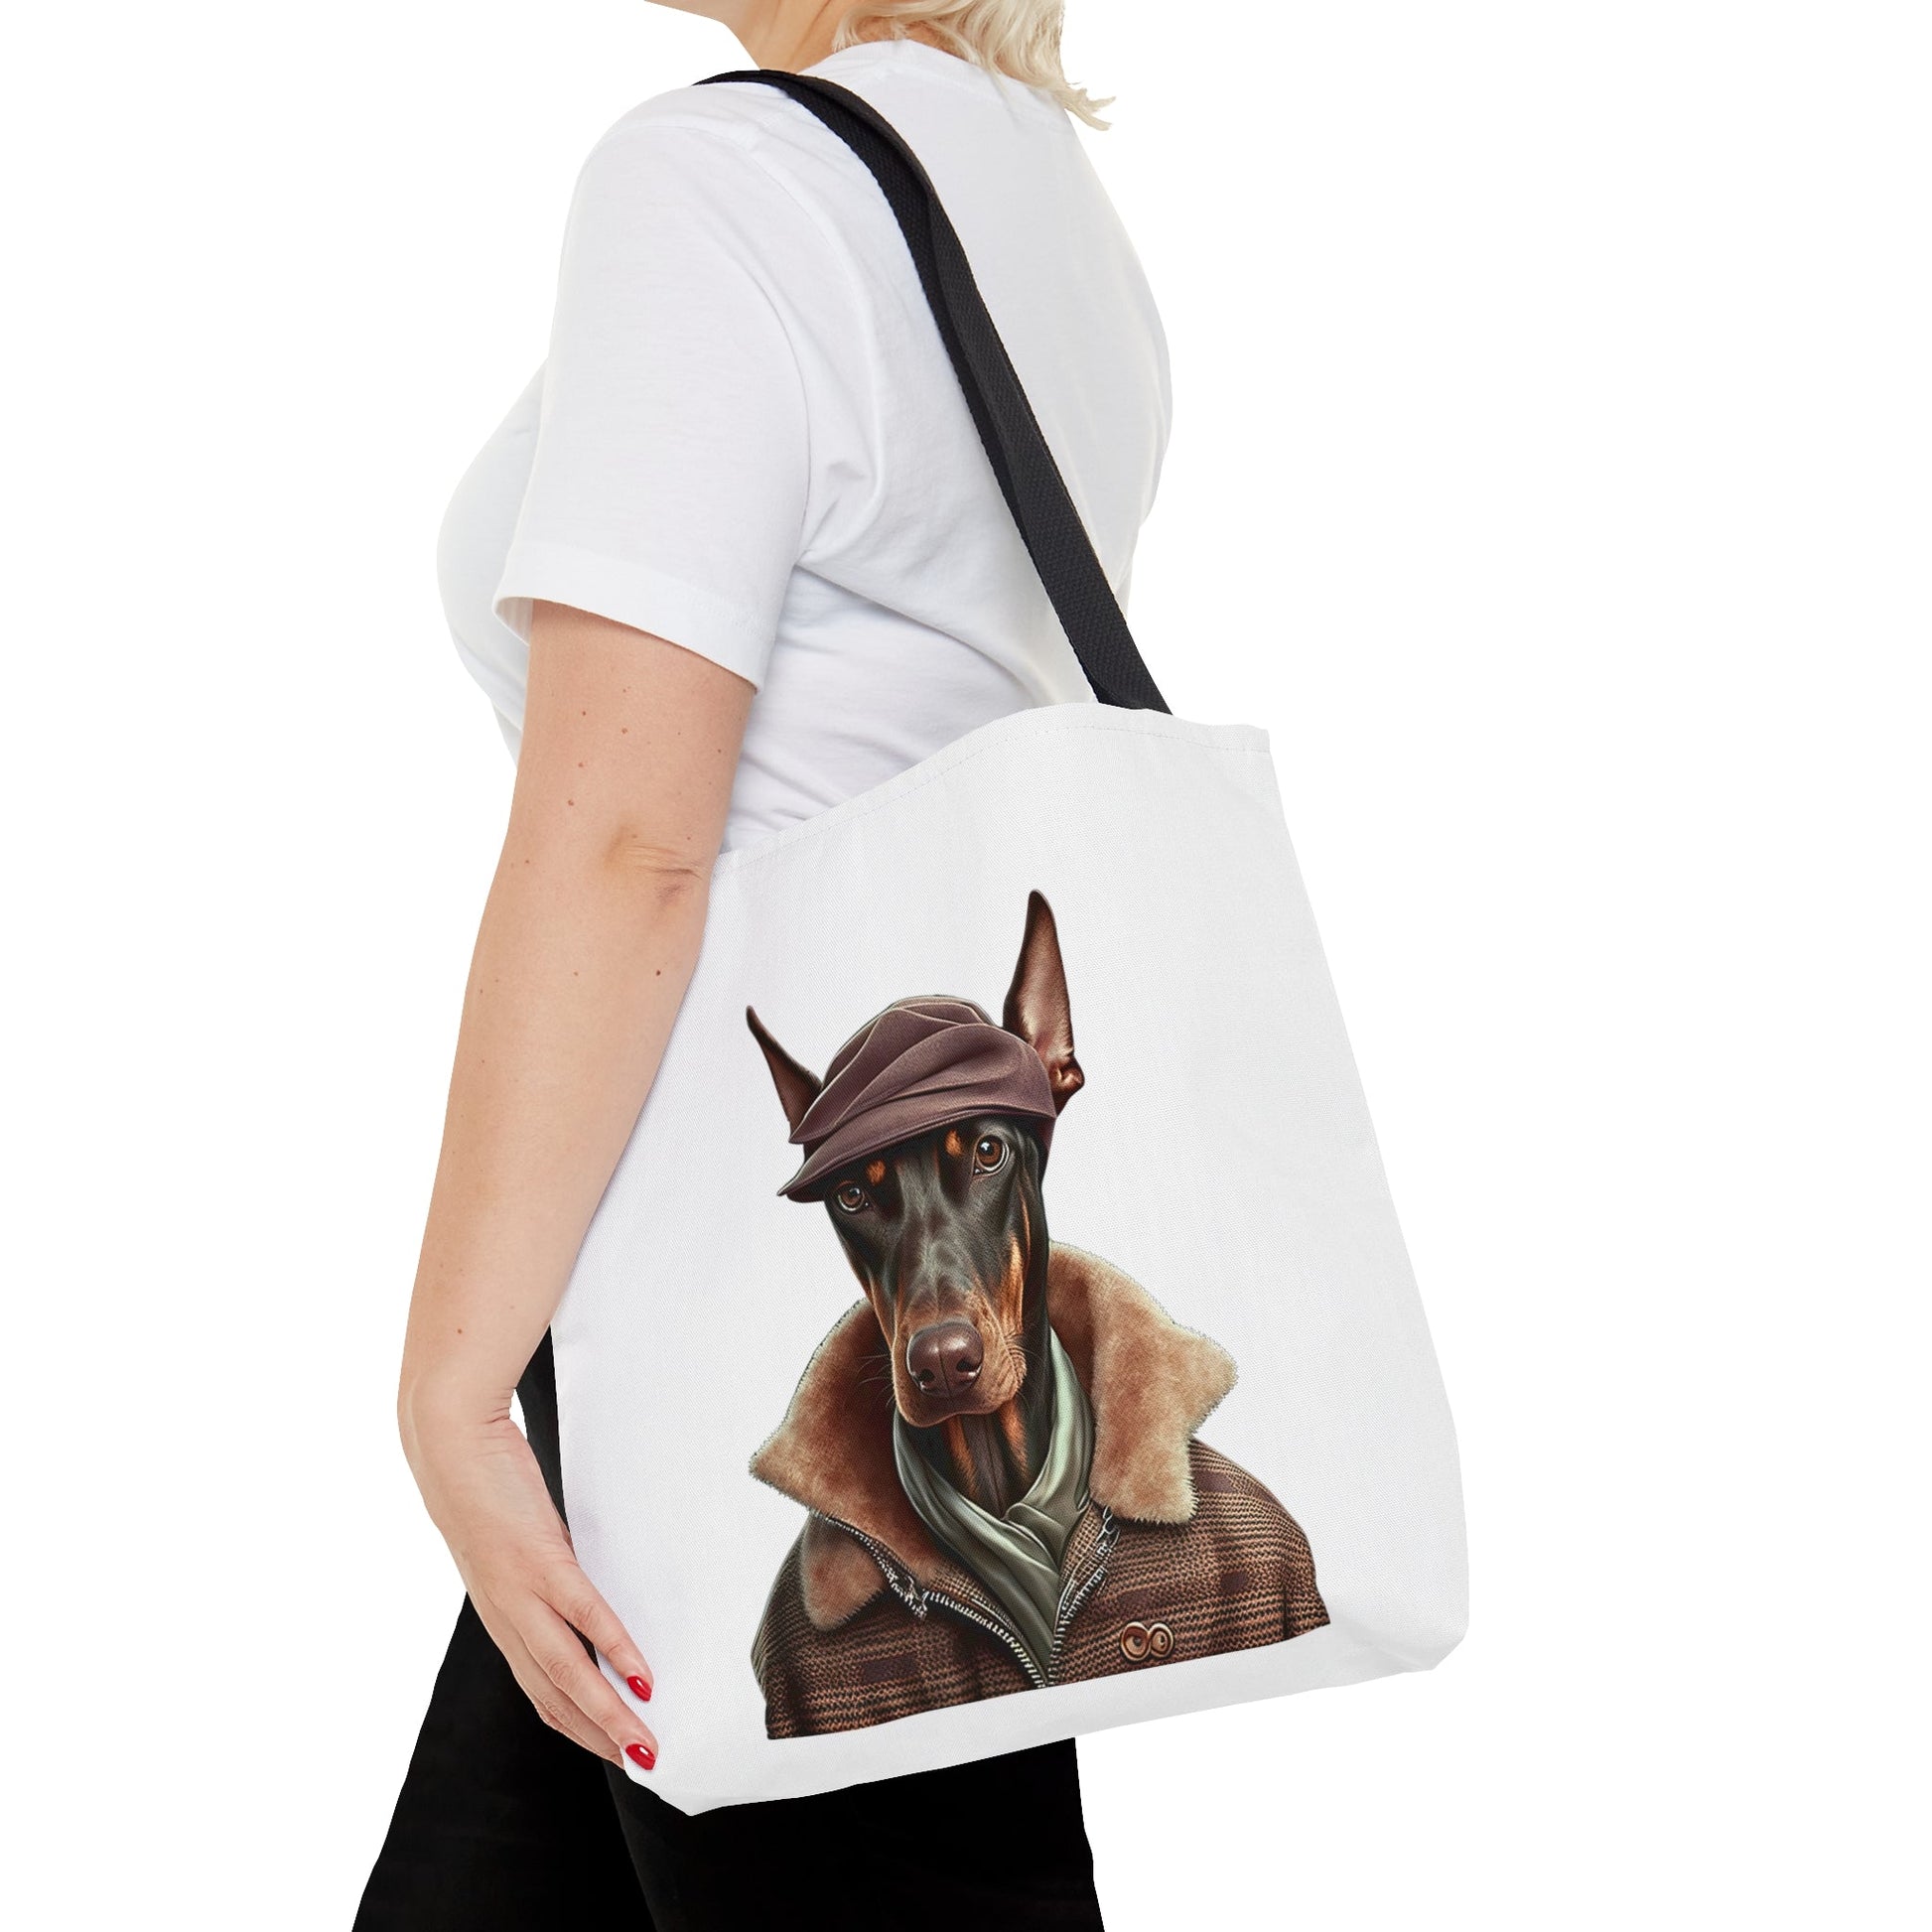 HORACE : Tote Bag - Shaggy Chic